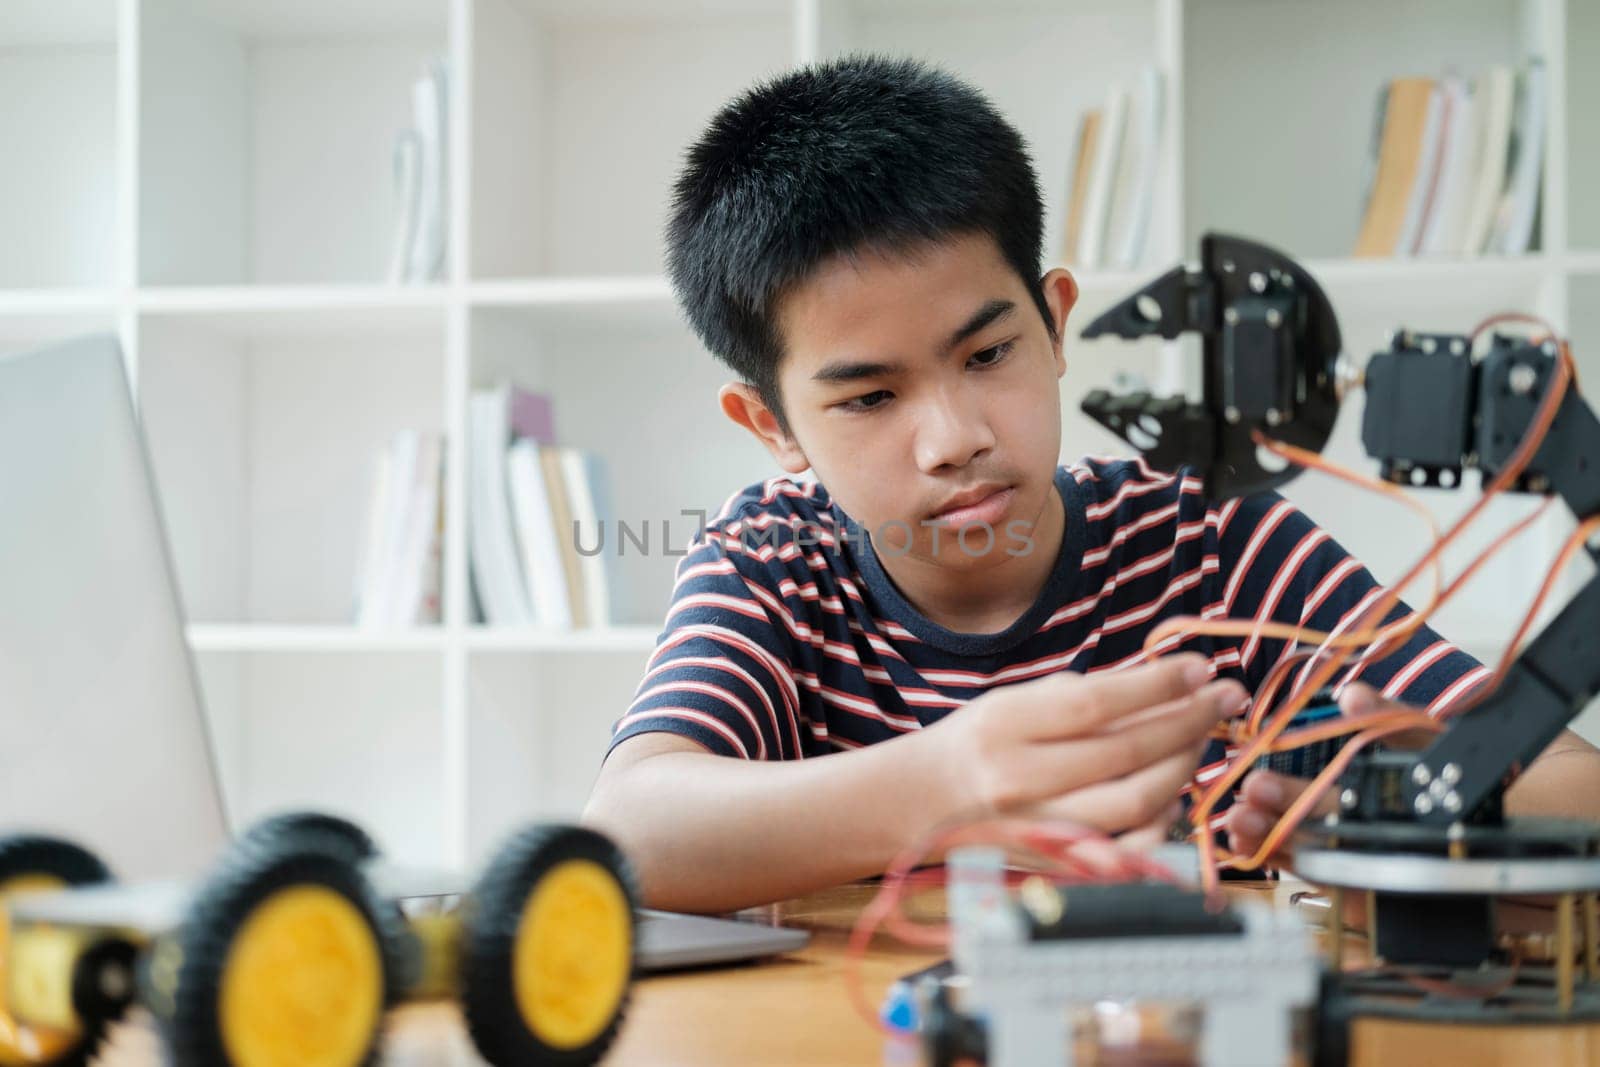 Student learning STEM education robotics for creating project studying for innovation robot models. New study generation for DIY electronic kits in mathematics engineering science technology computer code in computer technology classroom.